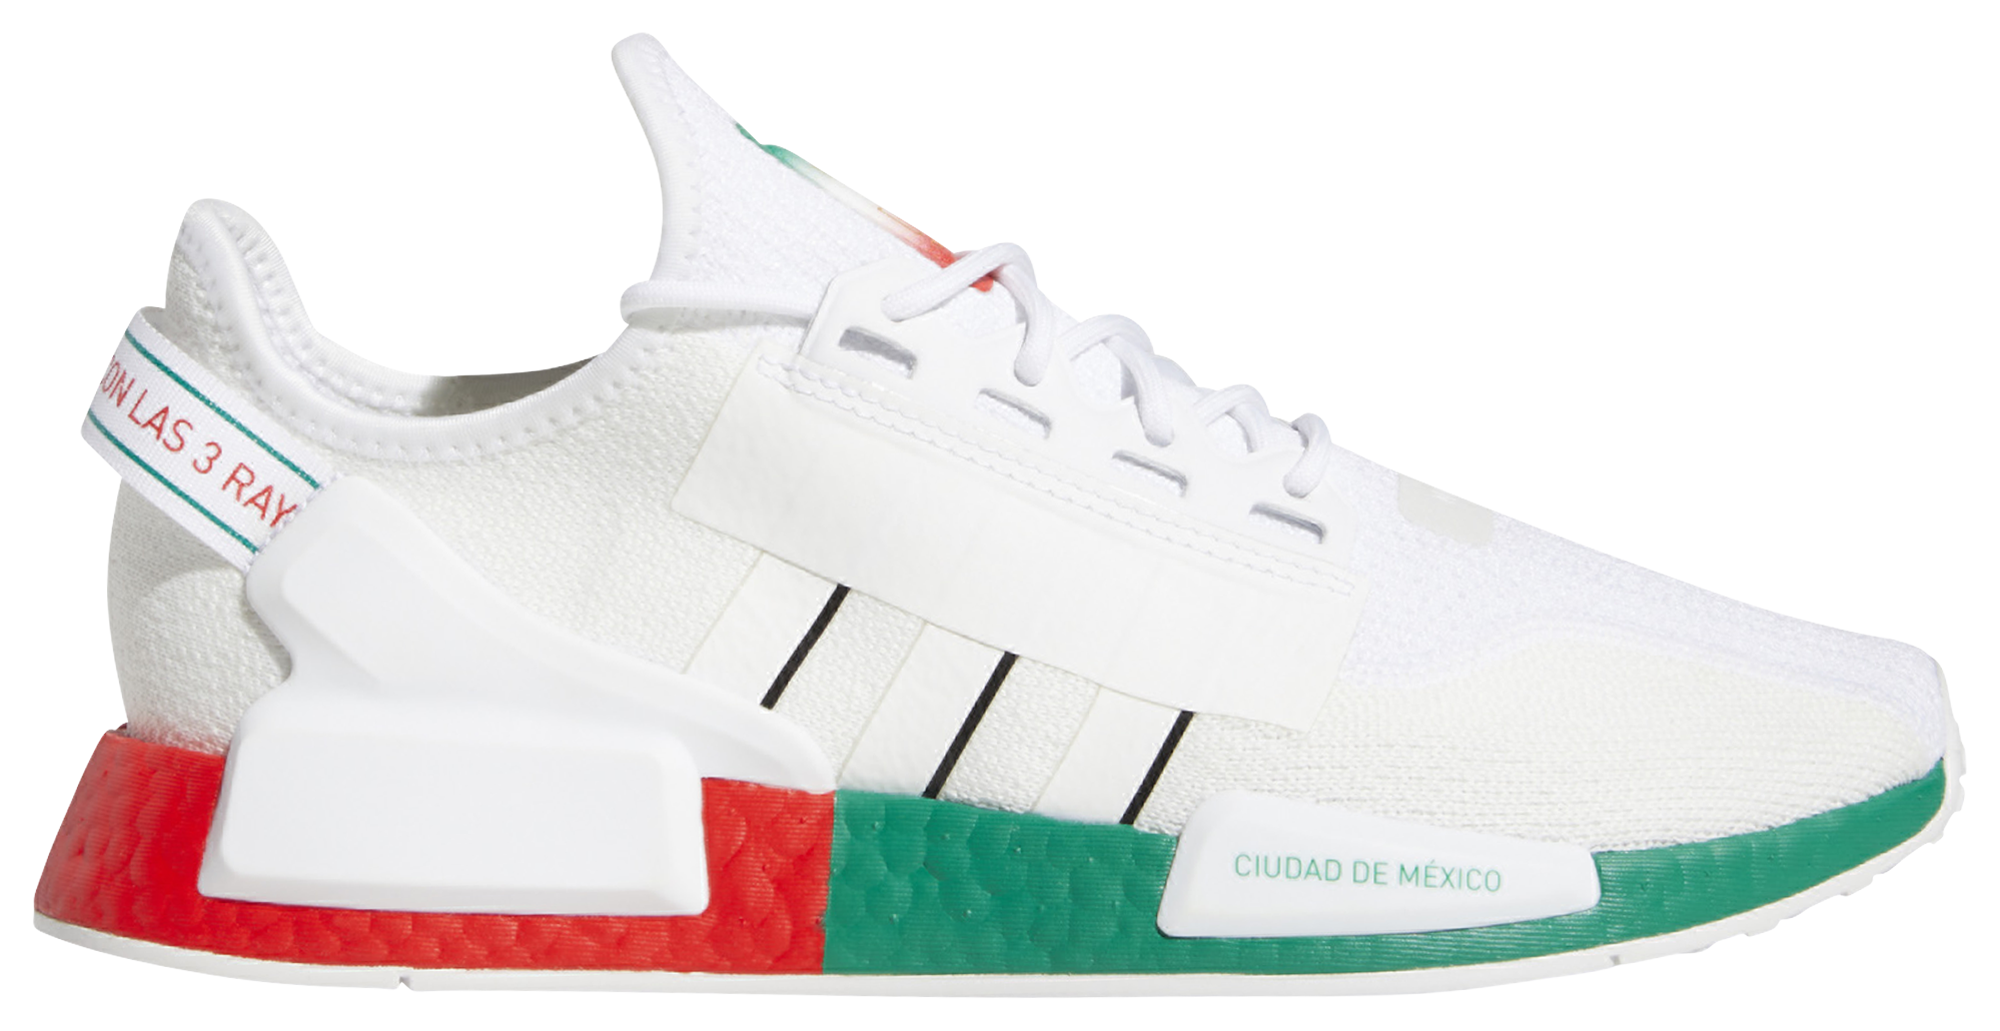 Nmd r1 Shoes Compare Prices on PriceRunner